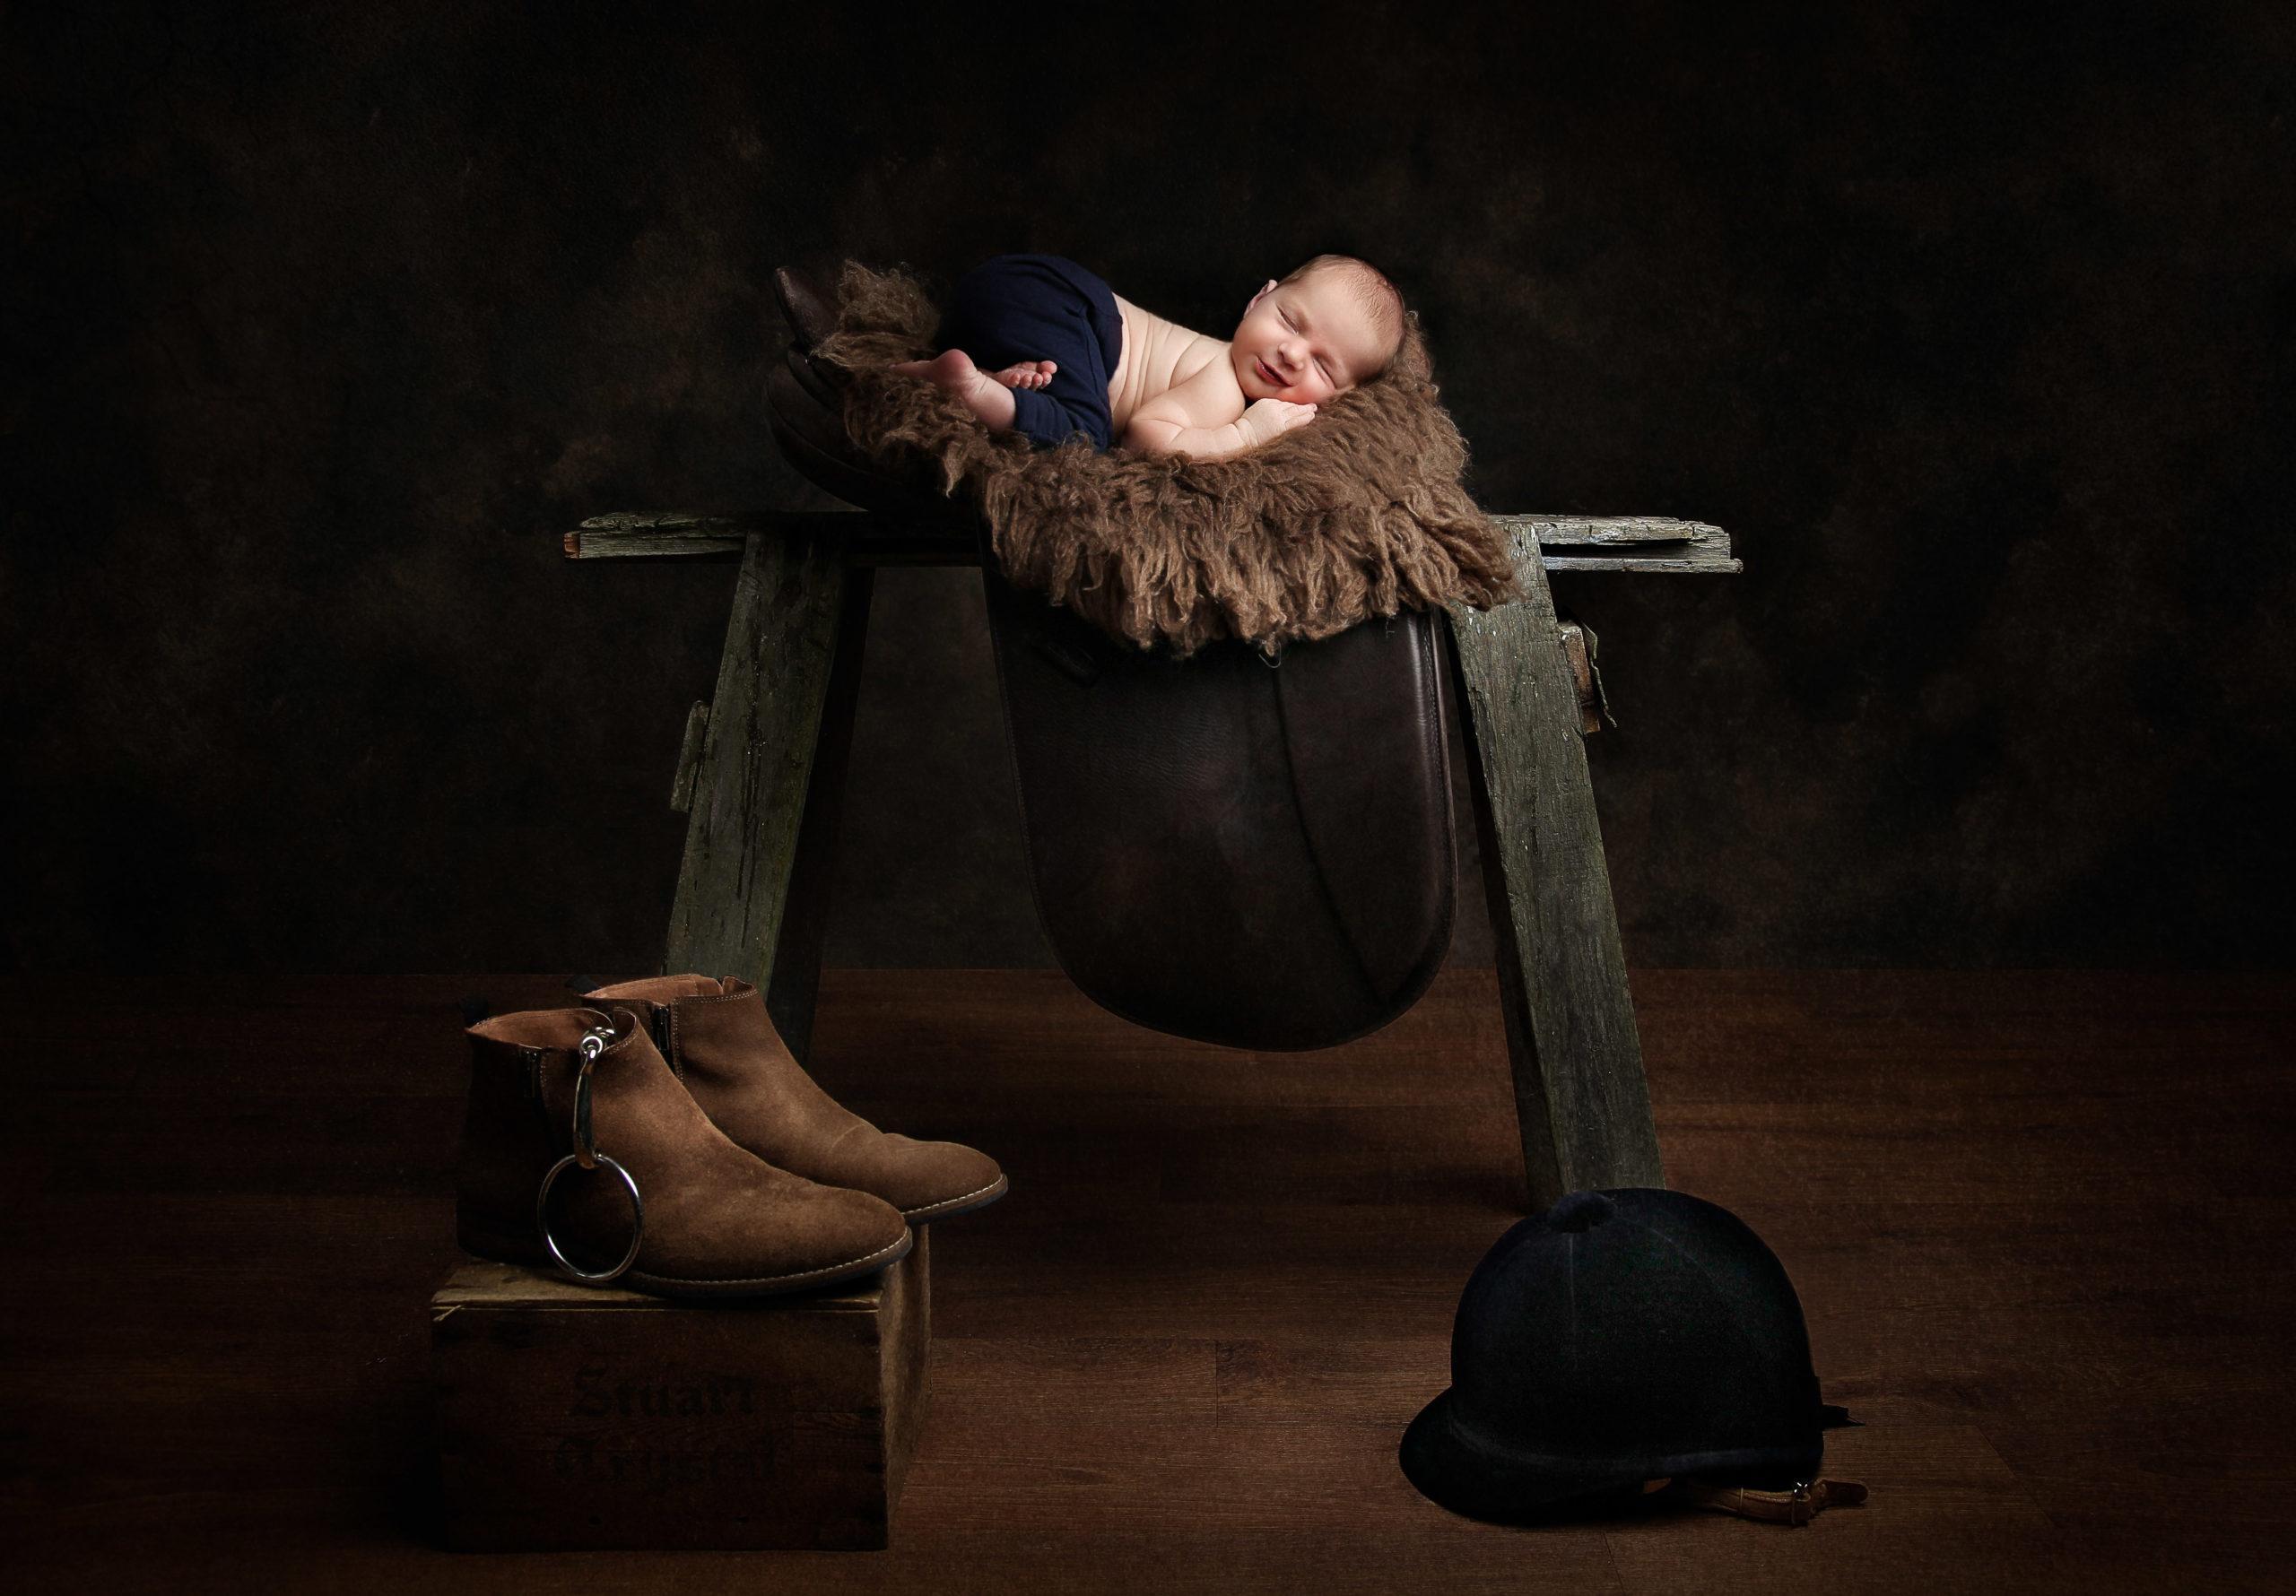 newborn baby asleep on a saddle with some riding boots on the floor